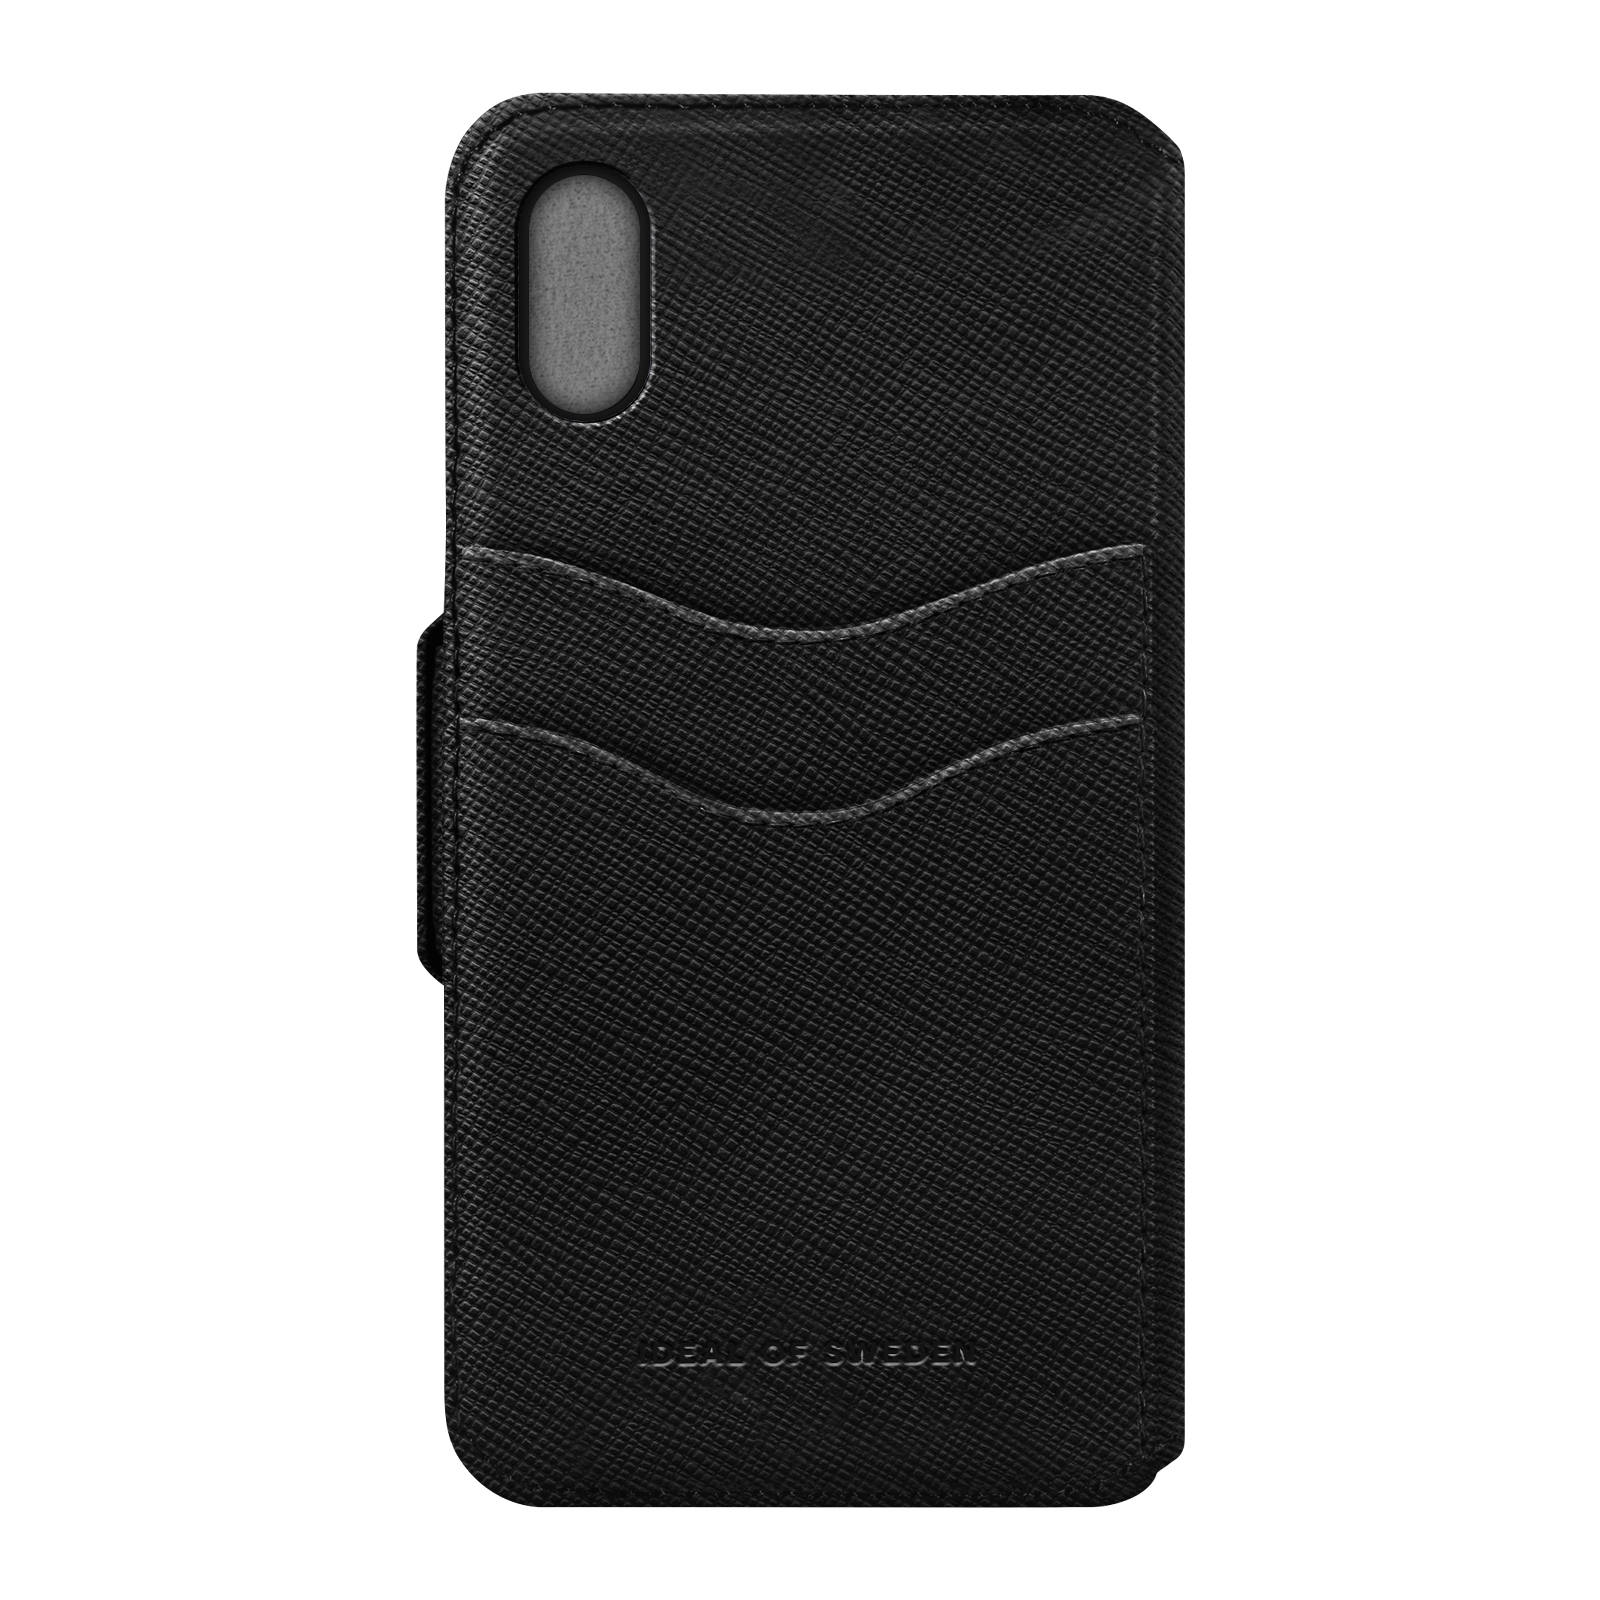 OF XS, SWEDEN Full iPhone X, Cover, IDFW-I8-01, IDEAL iPhone Apple, Black